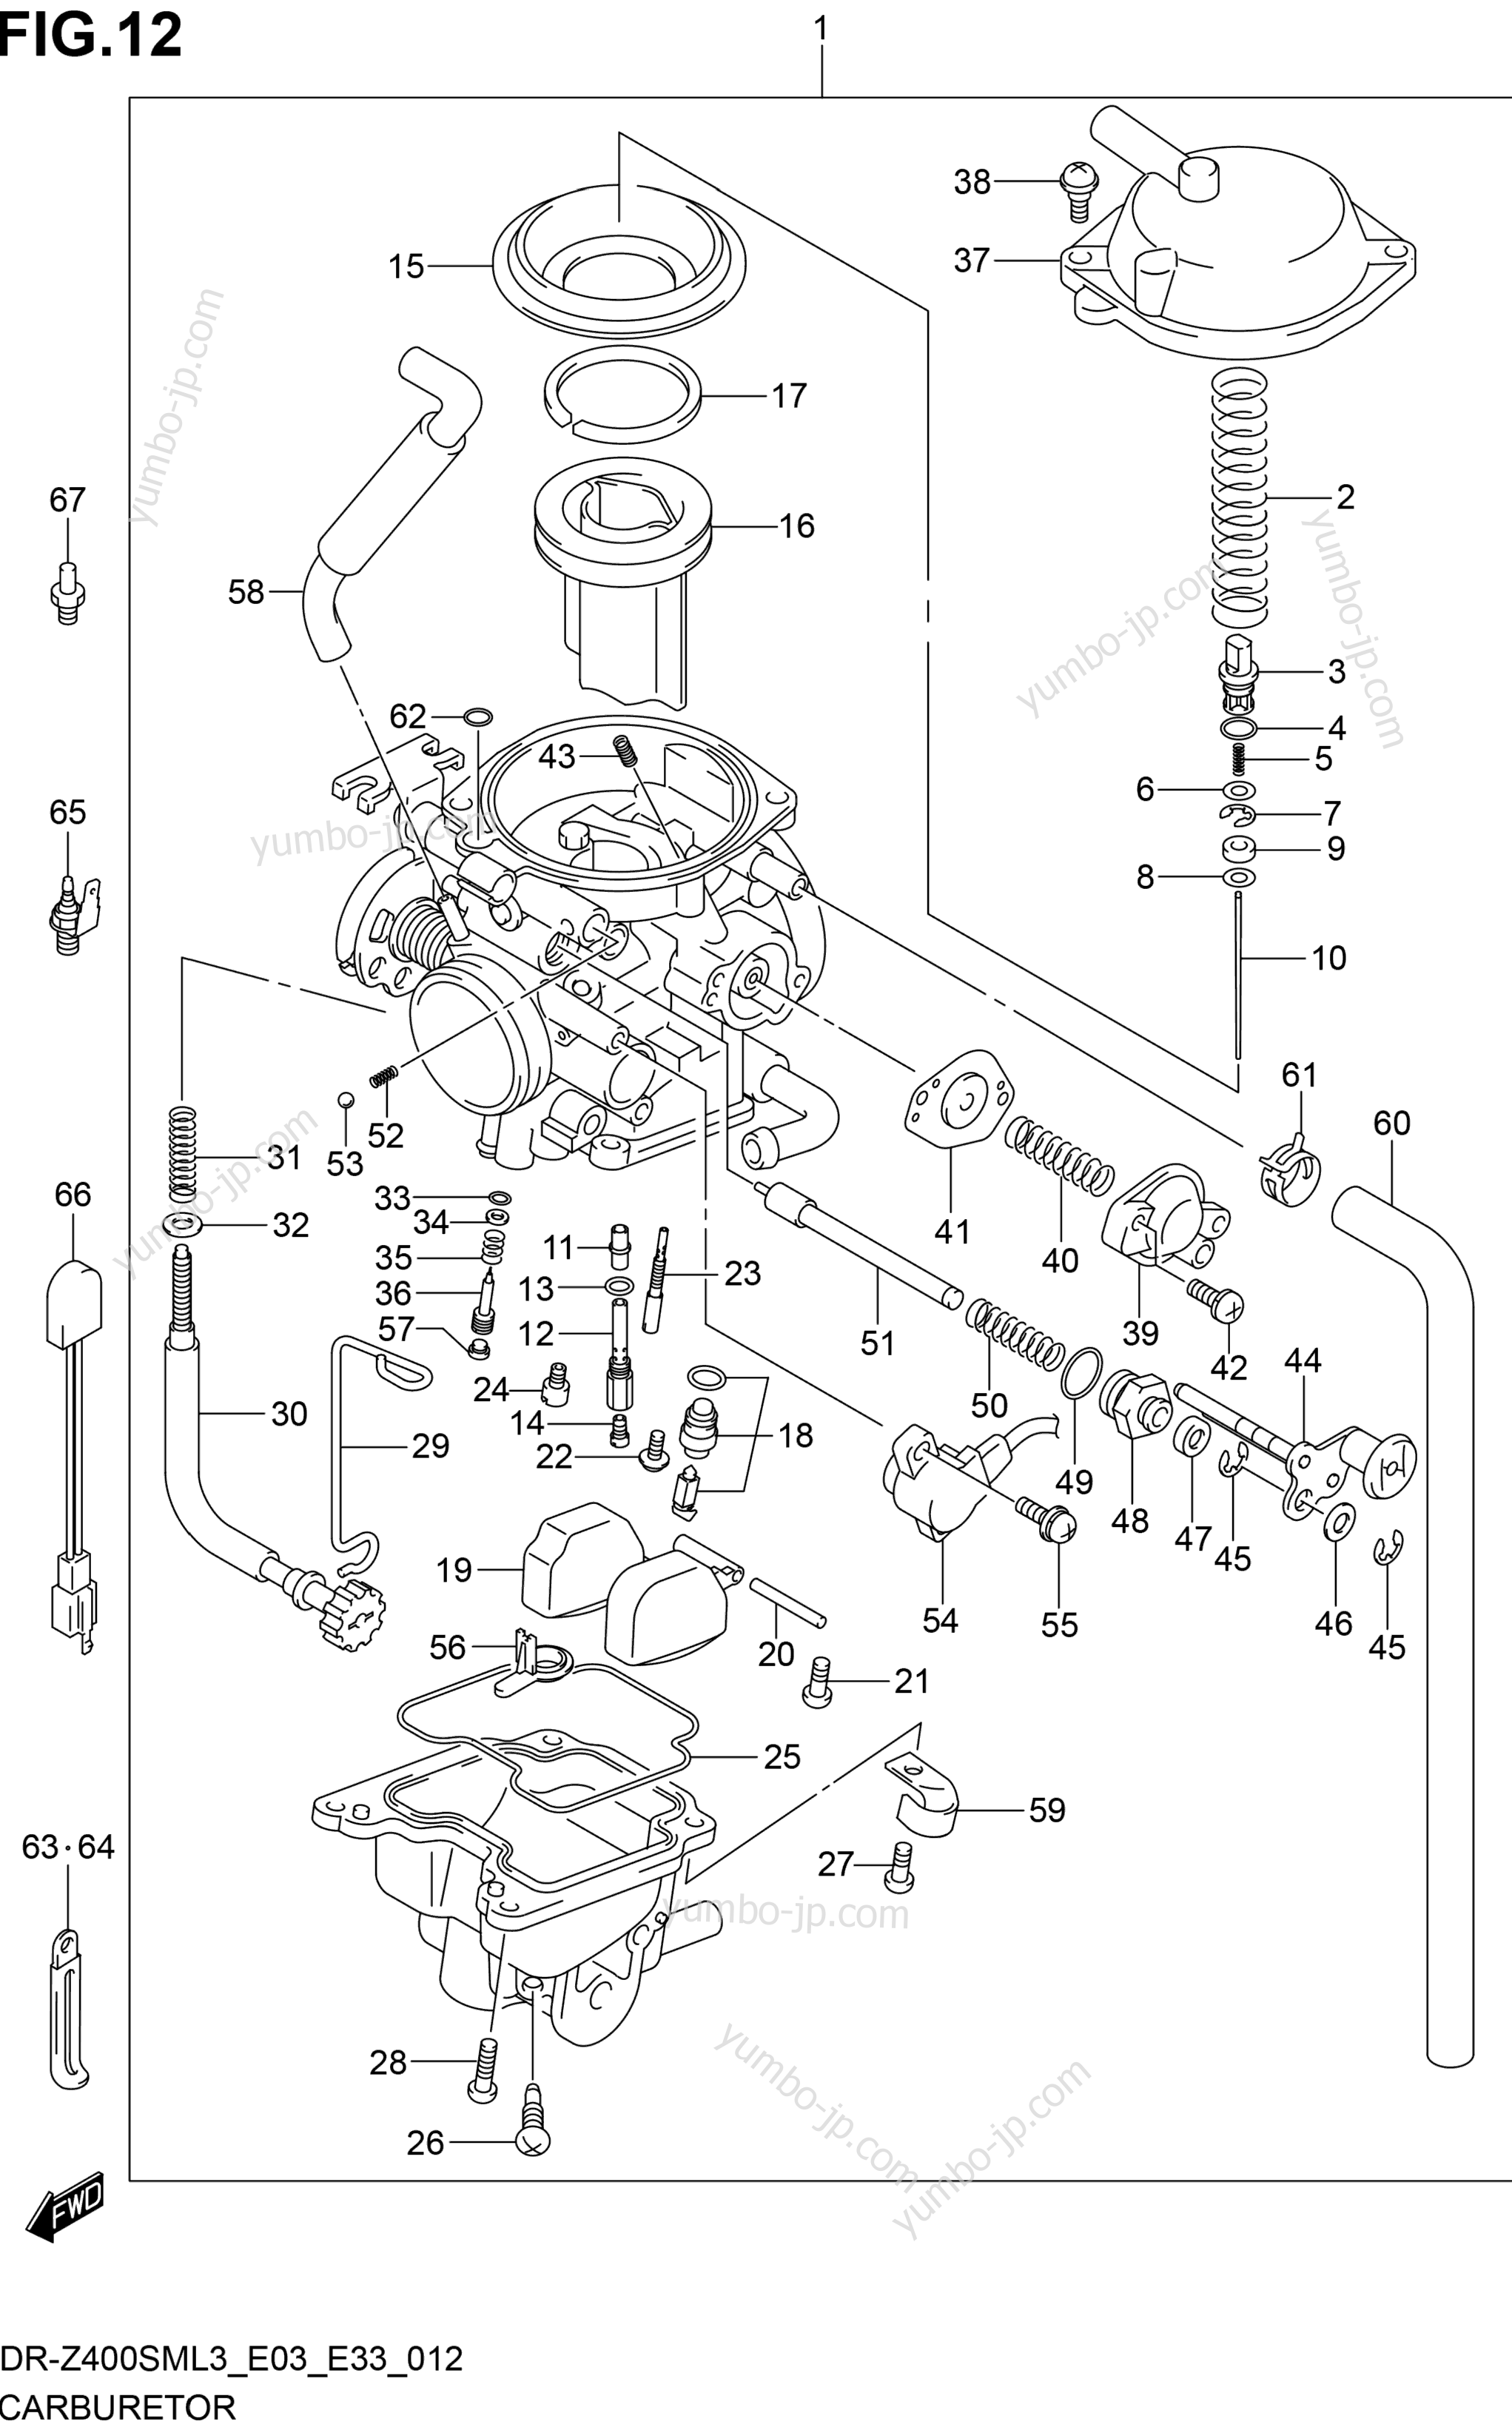 CARBURETOR (DR-Z400SML3 E03) for motorcycles SUZUKI DR-Z400SM 2013 year